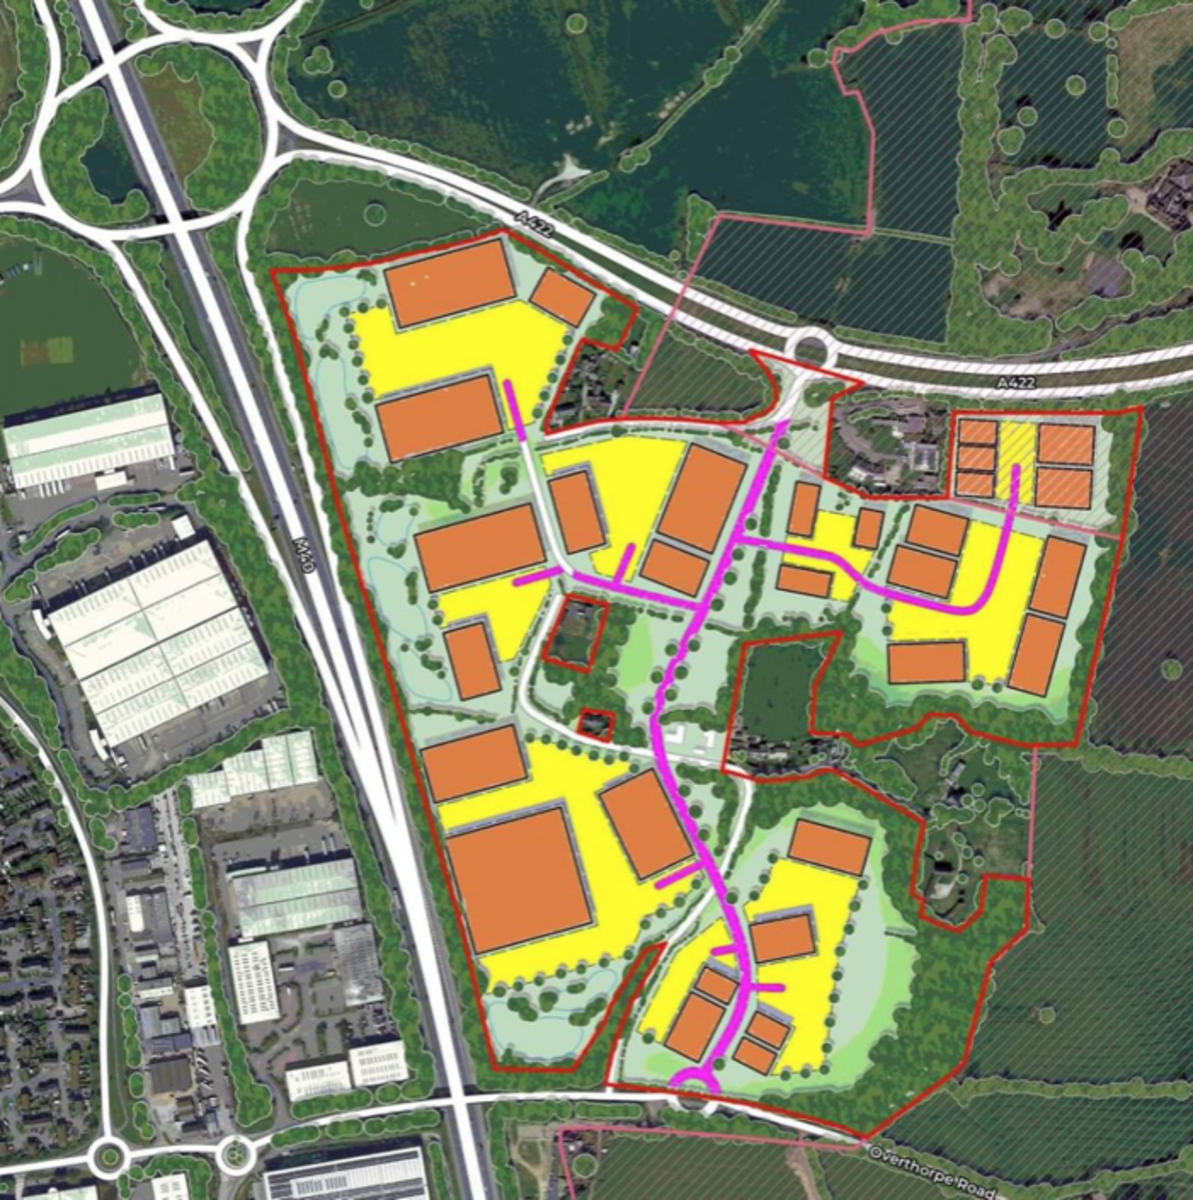 The proposed Nethercote development